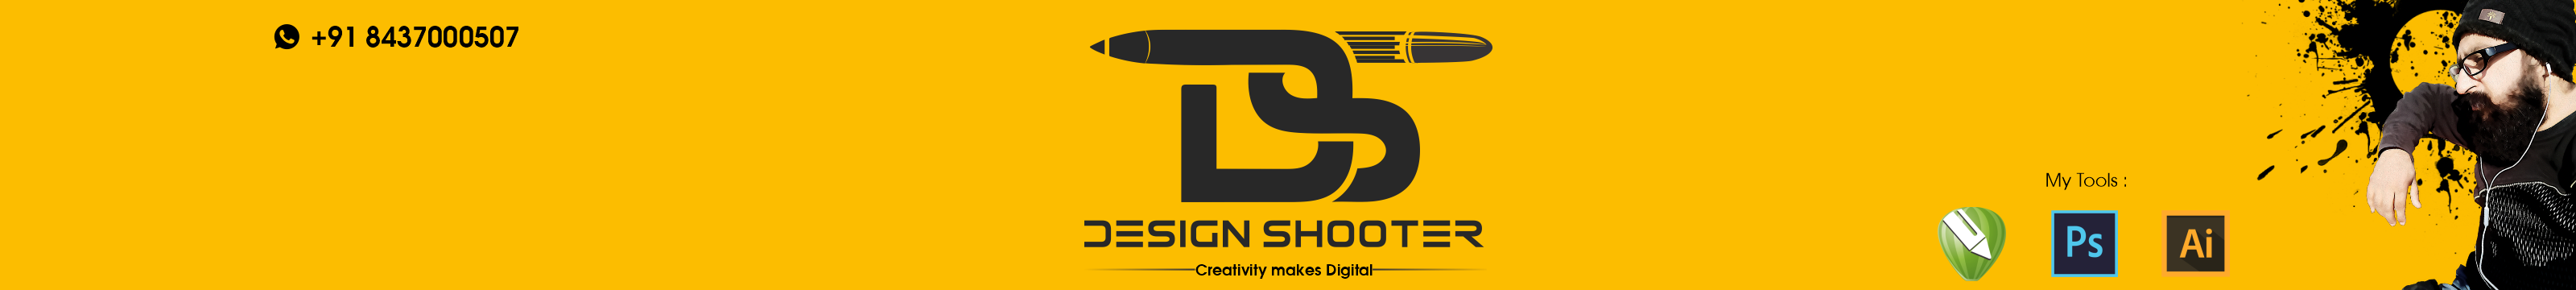 DesignShooters 👈🏻's profile banner